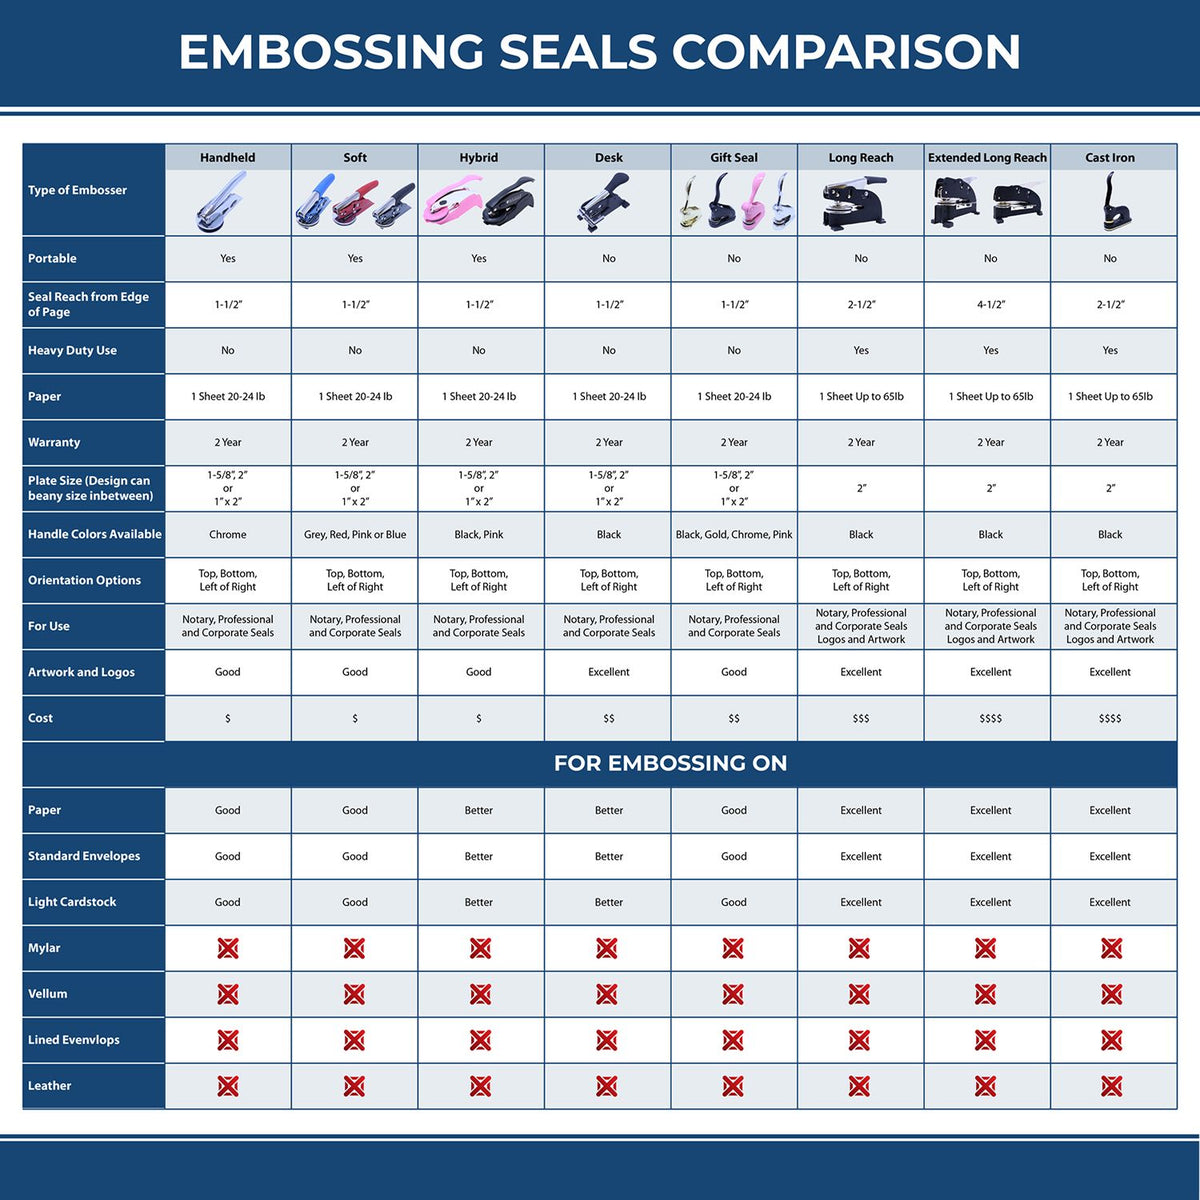 A comparison chart for the different types of mount models available for the Hybrid New Jersey Architect Seal